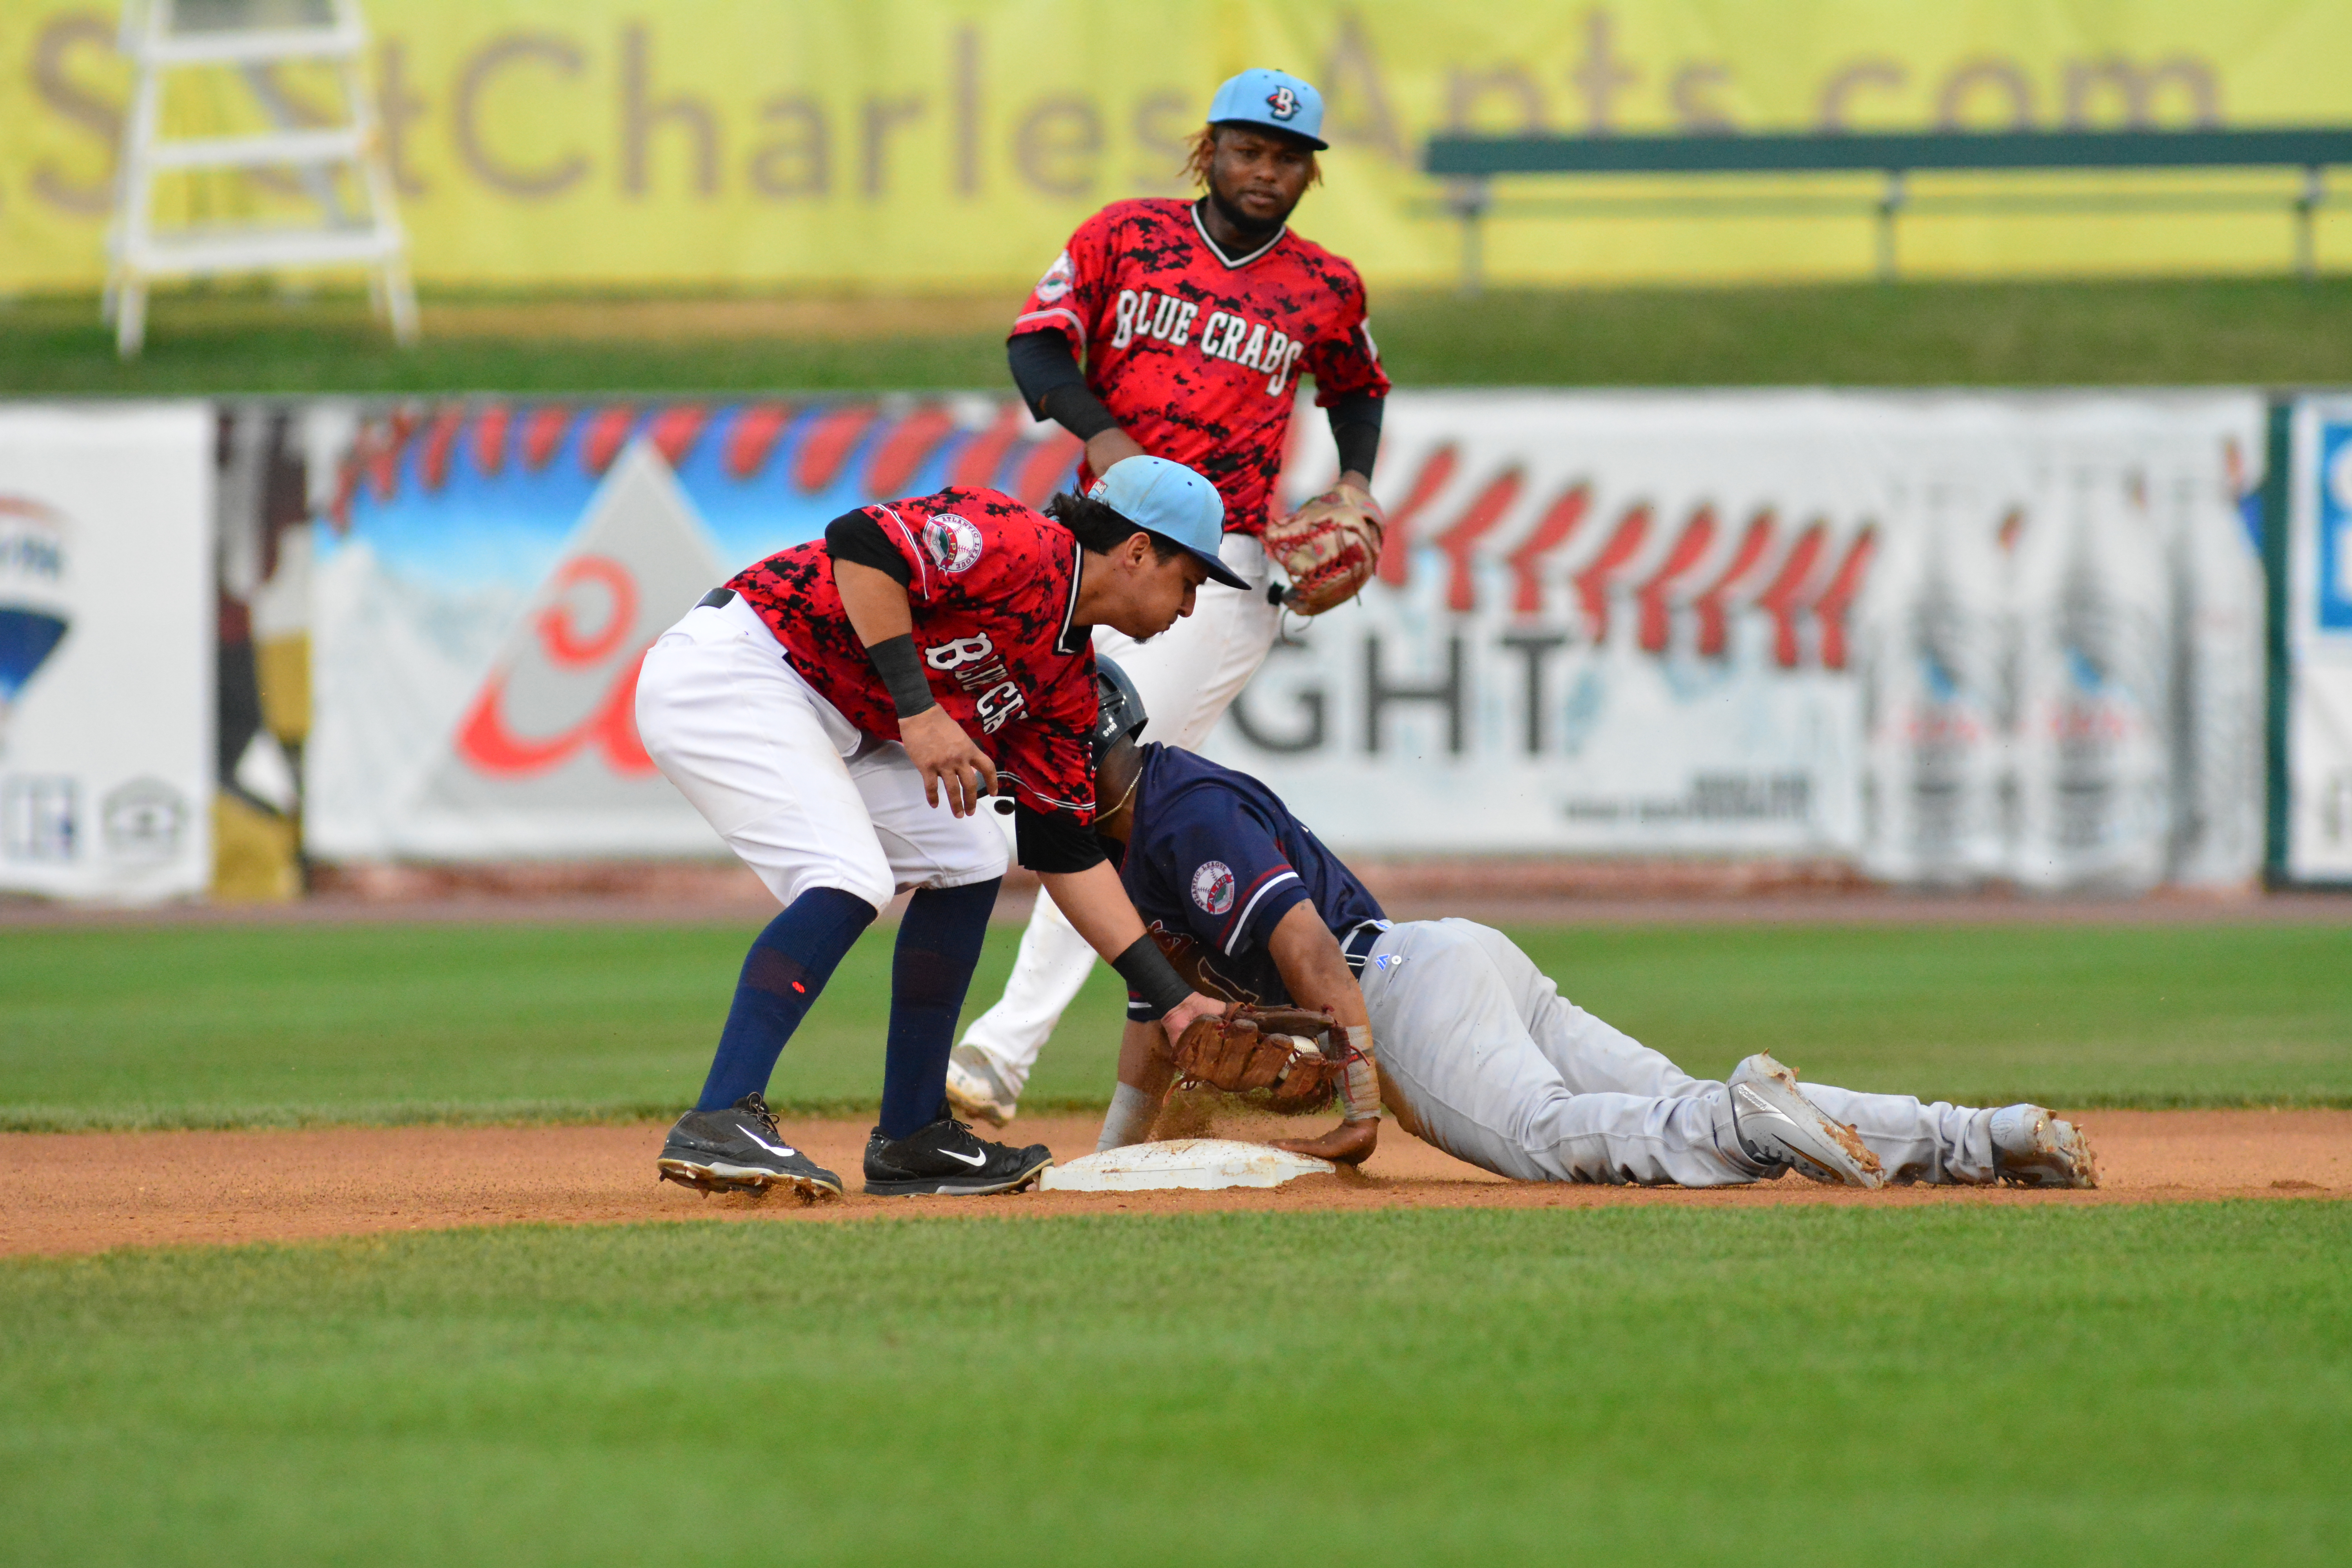 Blue Crabs Fall in Opener Against Somerset